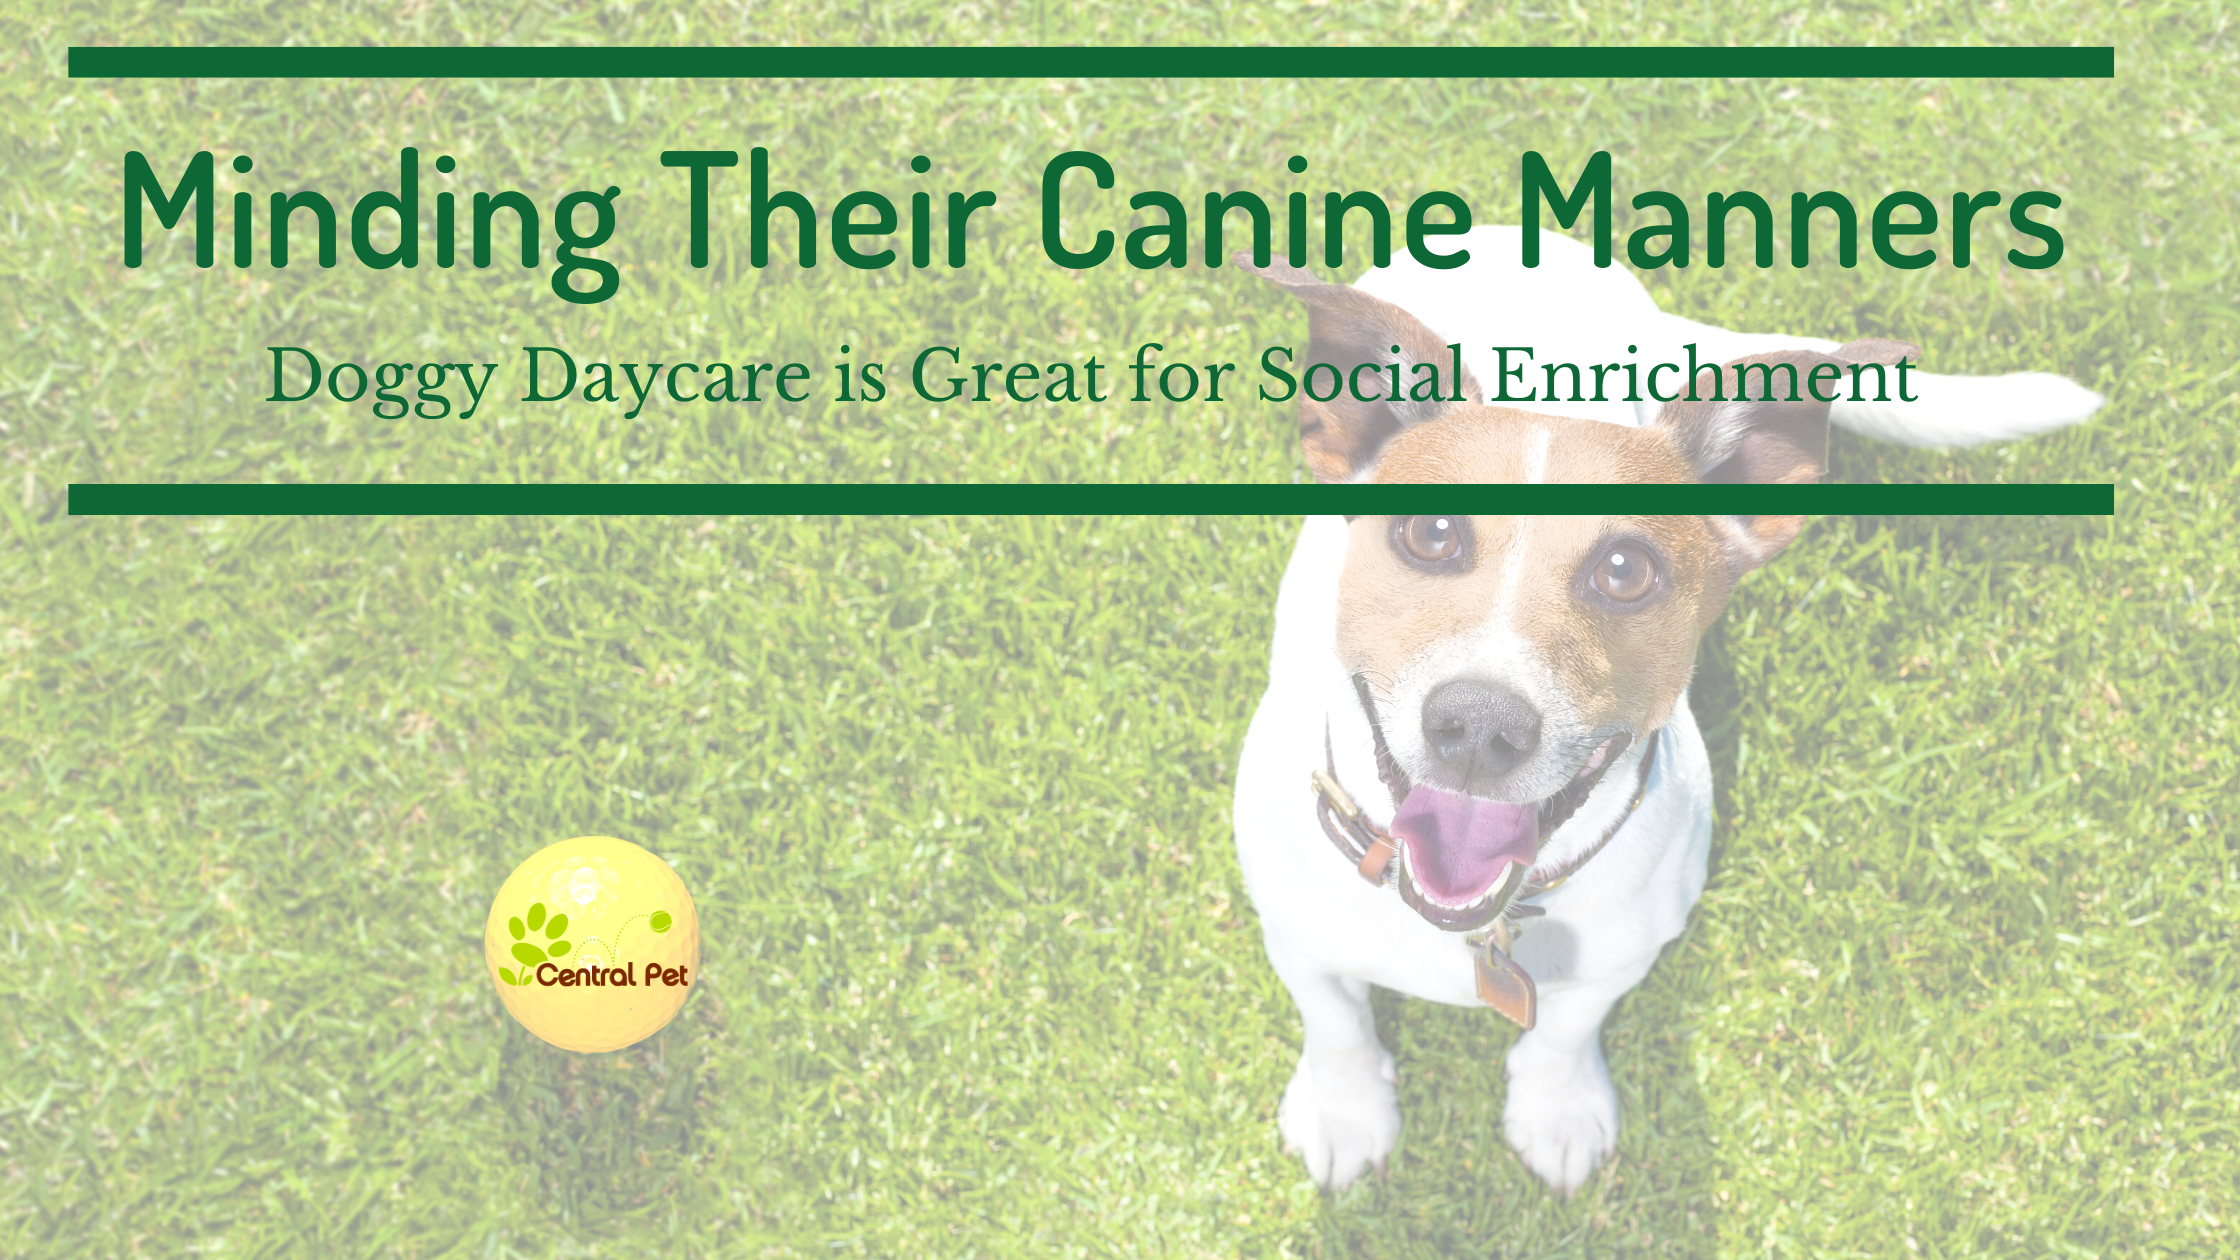 Minding Their Canine Manners: Doggy Daycare is Great Social Enrichment